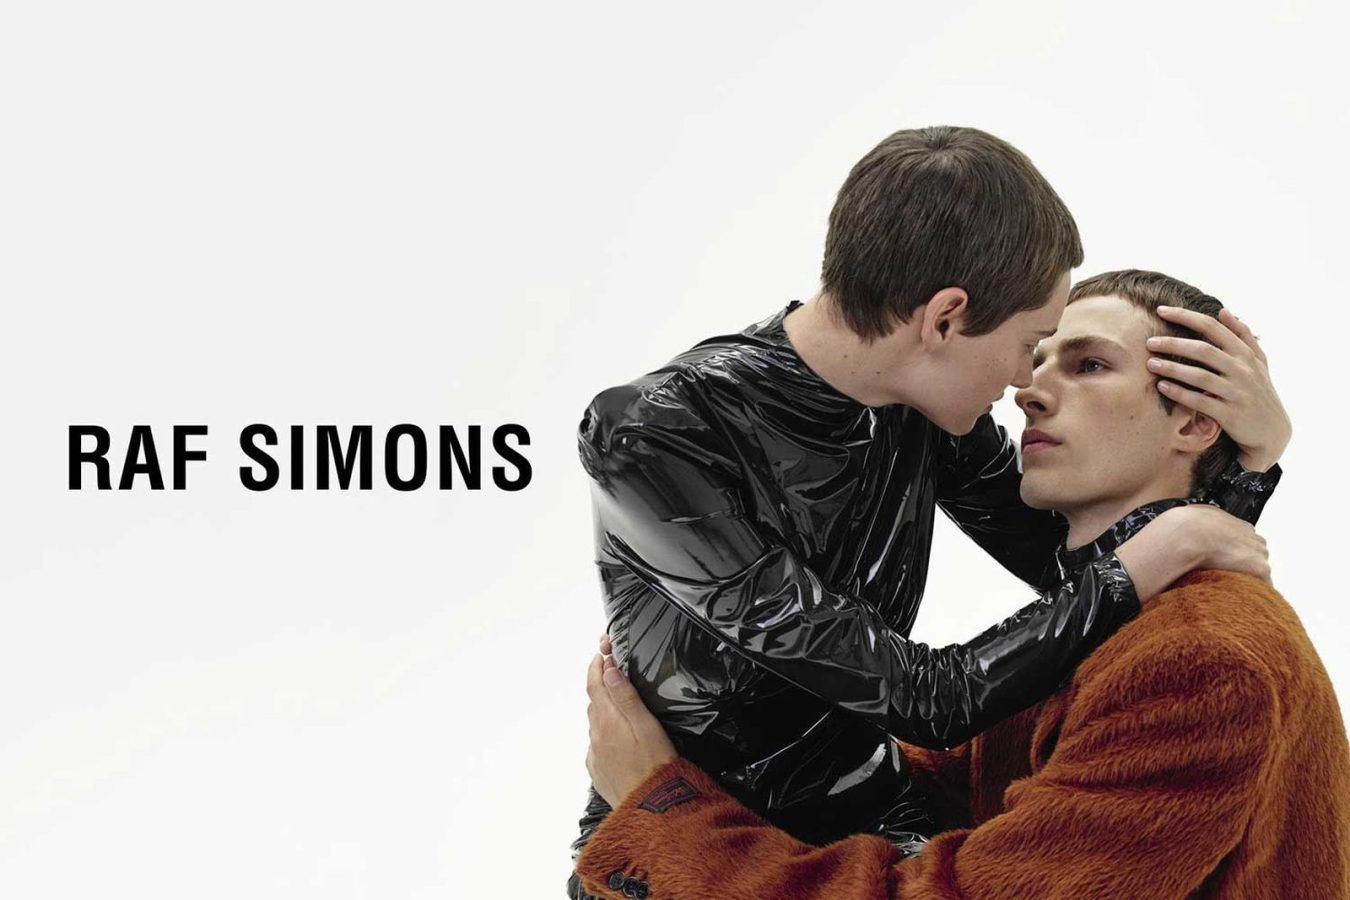 After 27 Years, Raf Simons Is Closing His Eponymous Label - Fashionista